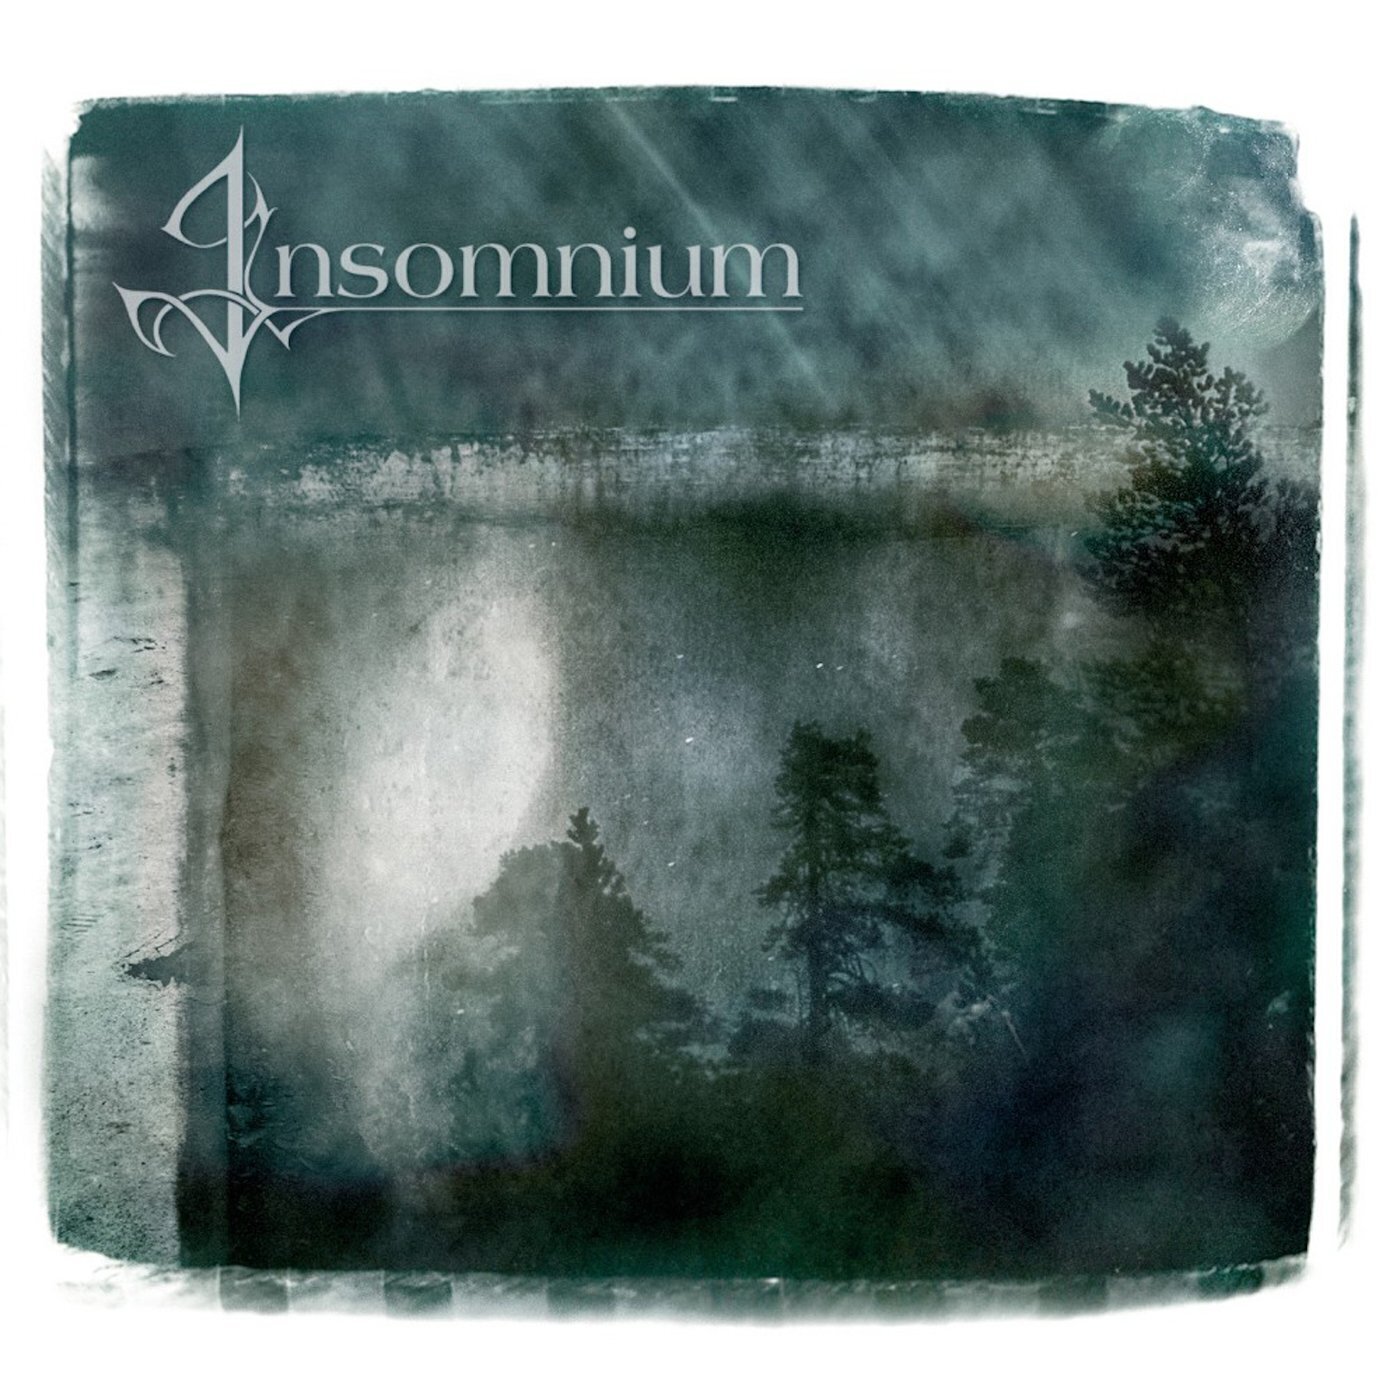 Vinyl Record Insomnium - Since The Day It All Came (2 LP)